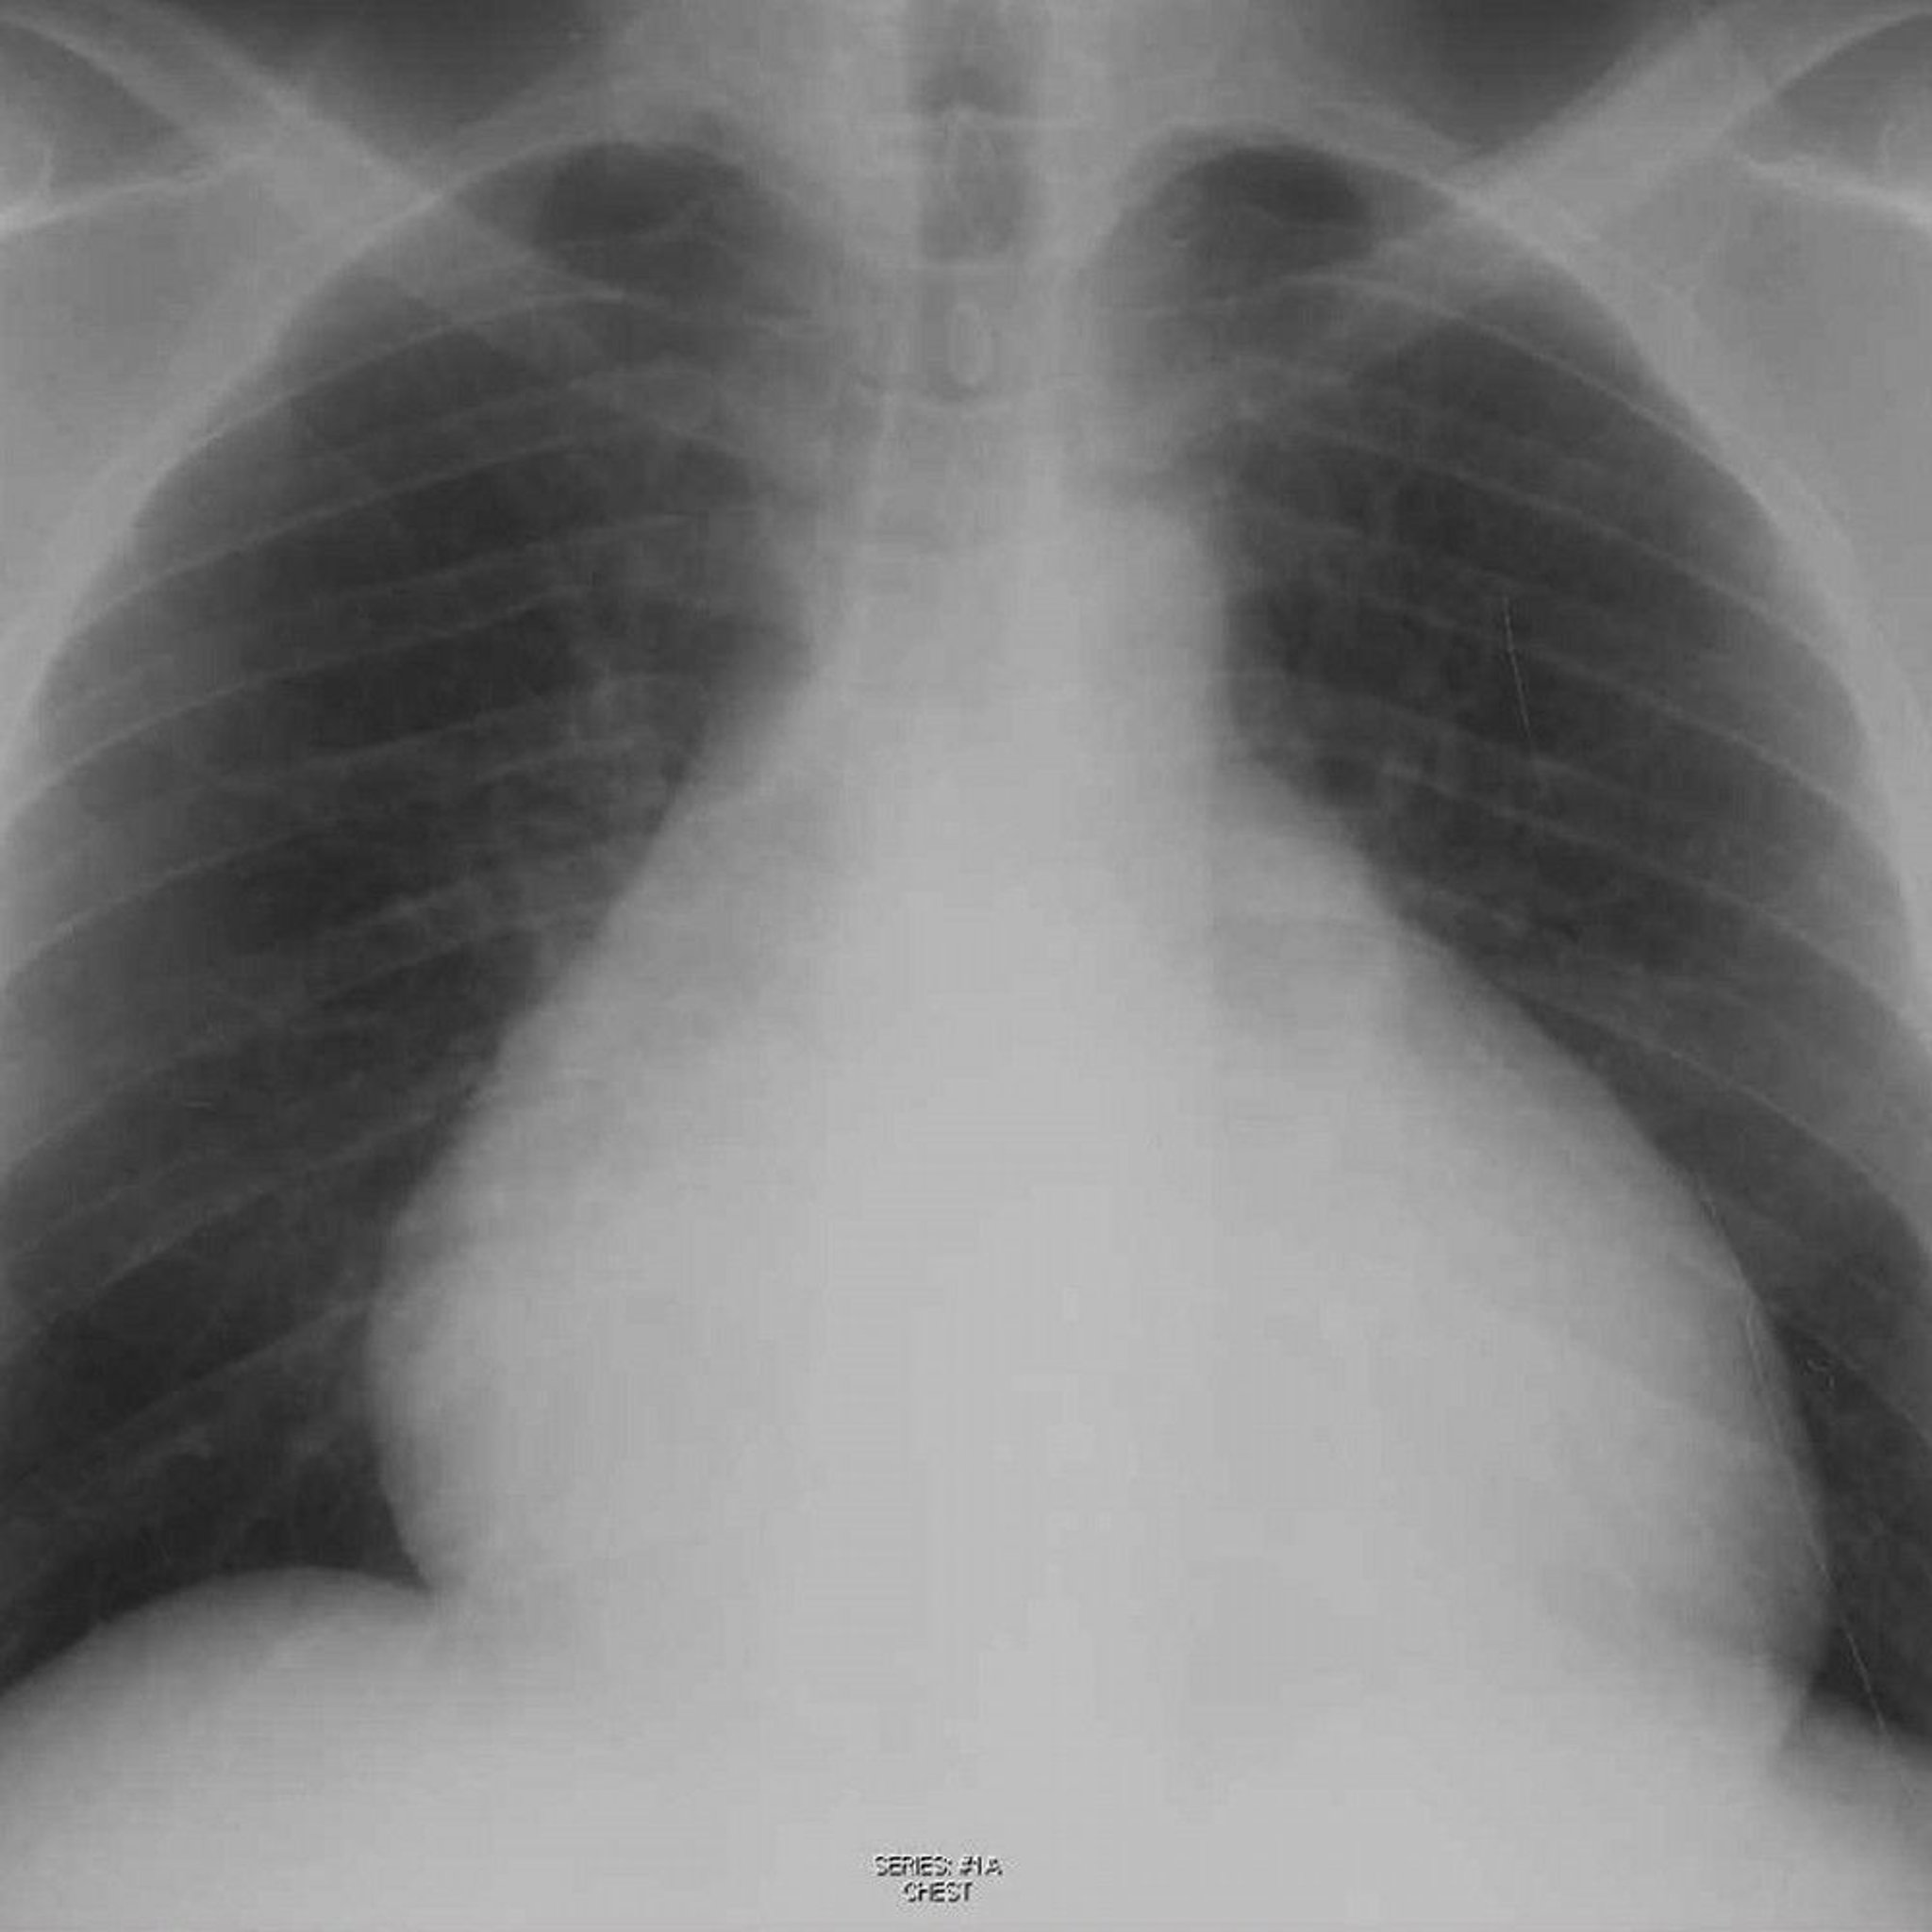 Chest Radiograph of a Patient with Pericardial Effusion